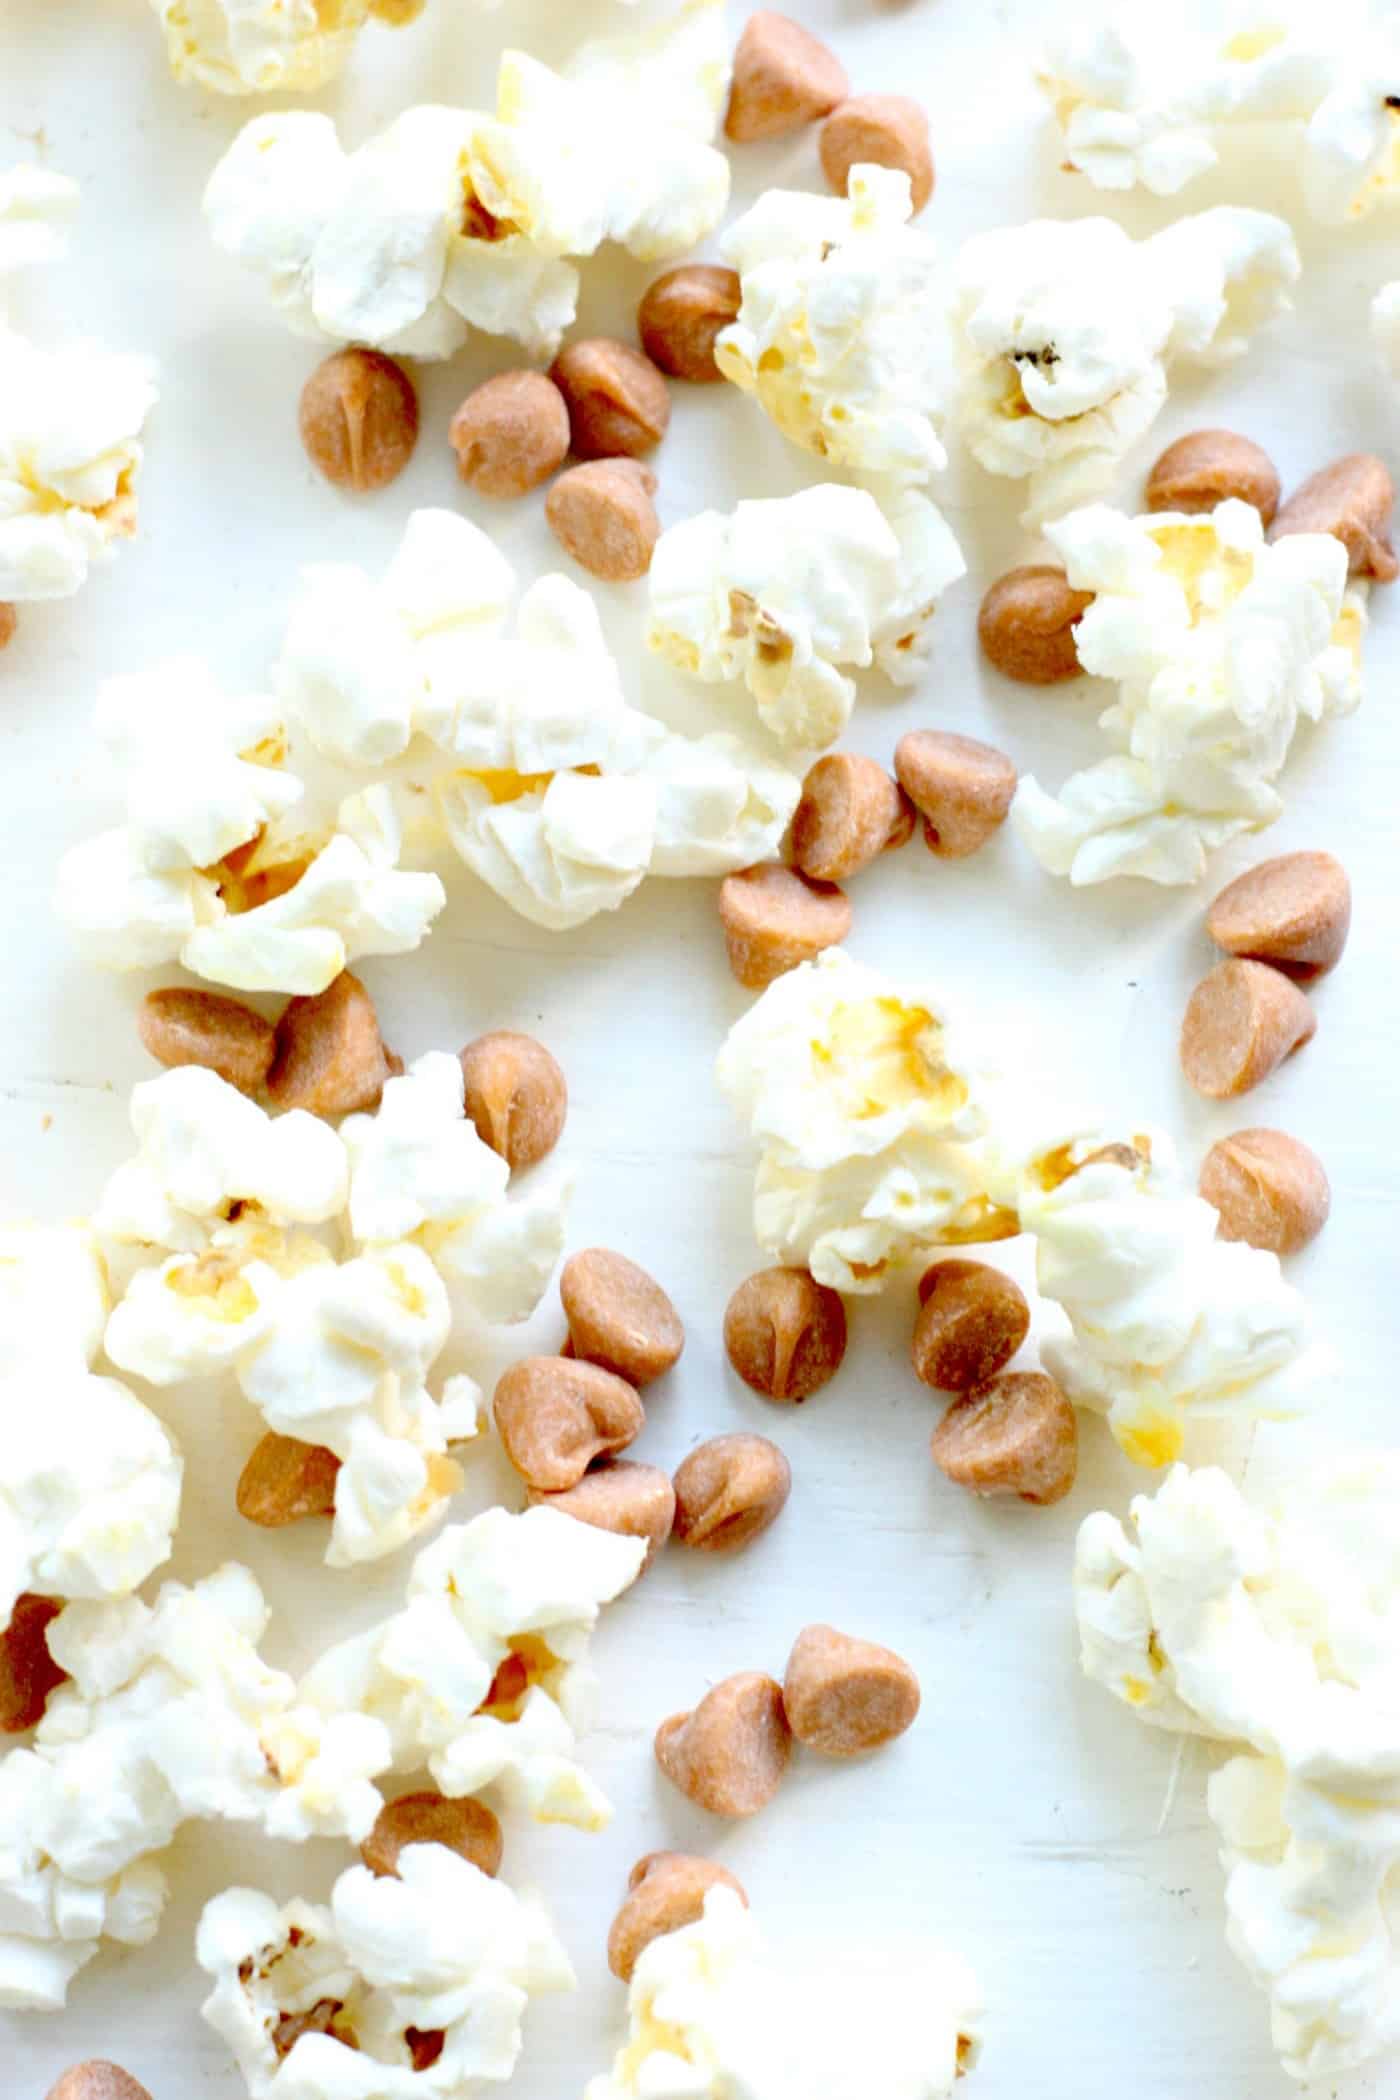 Butterscotch chips and popcorn